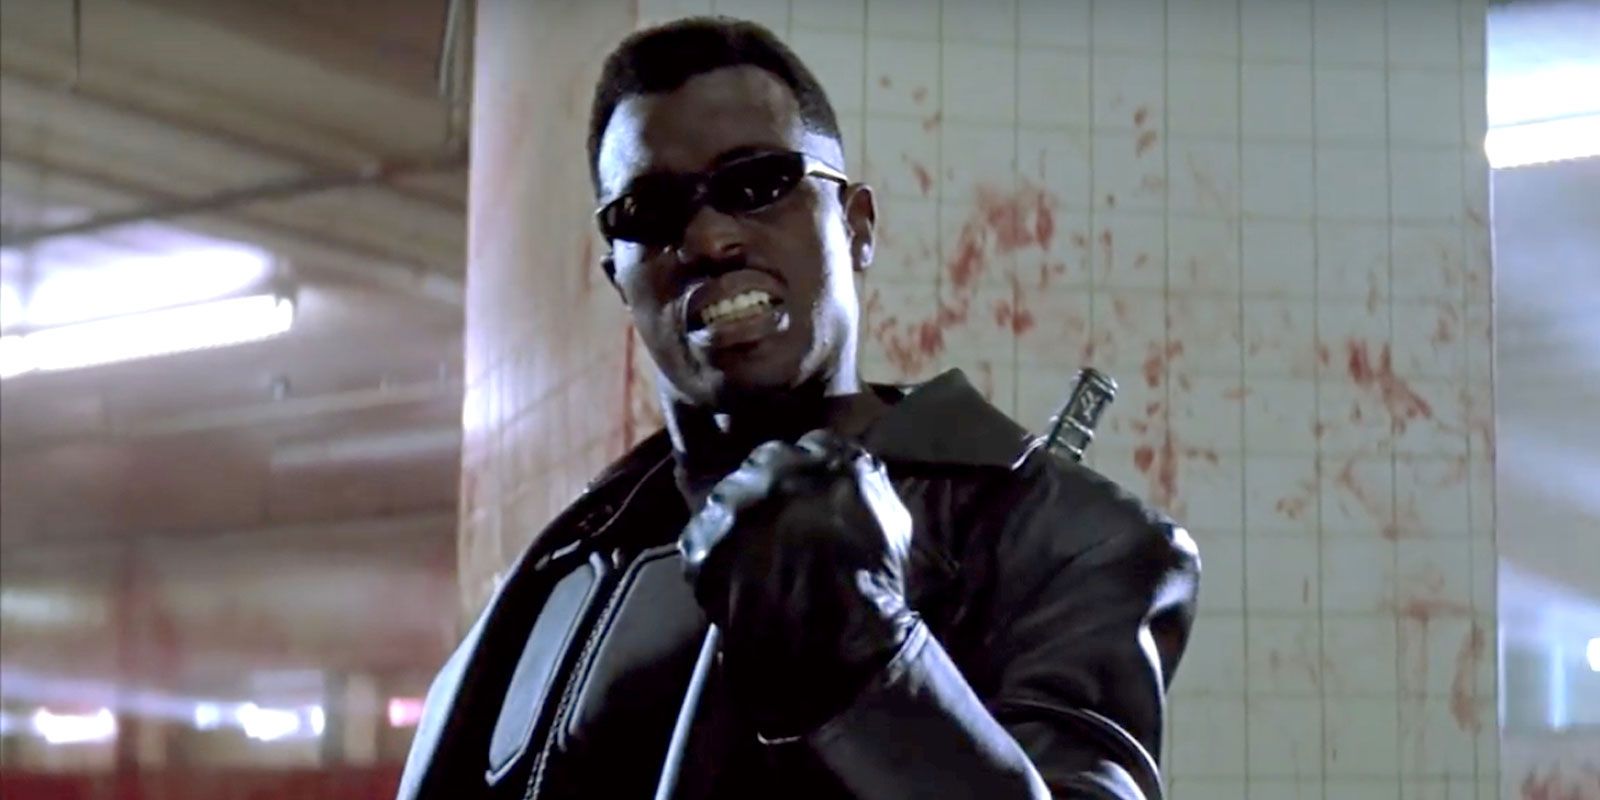 Wesley Snipes, victorious, as Blade.